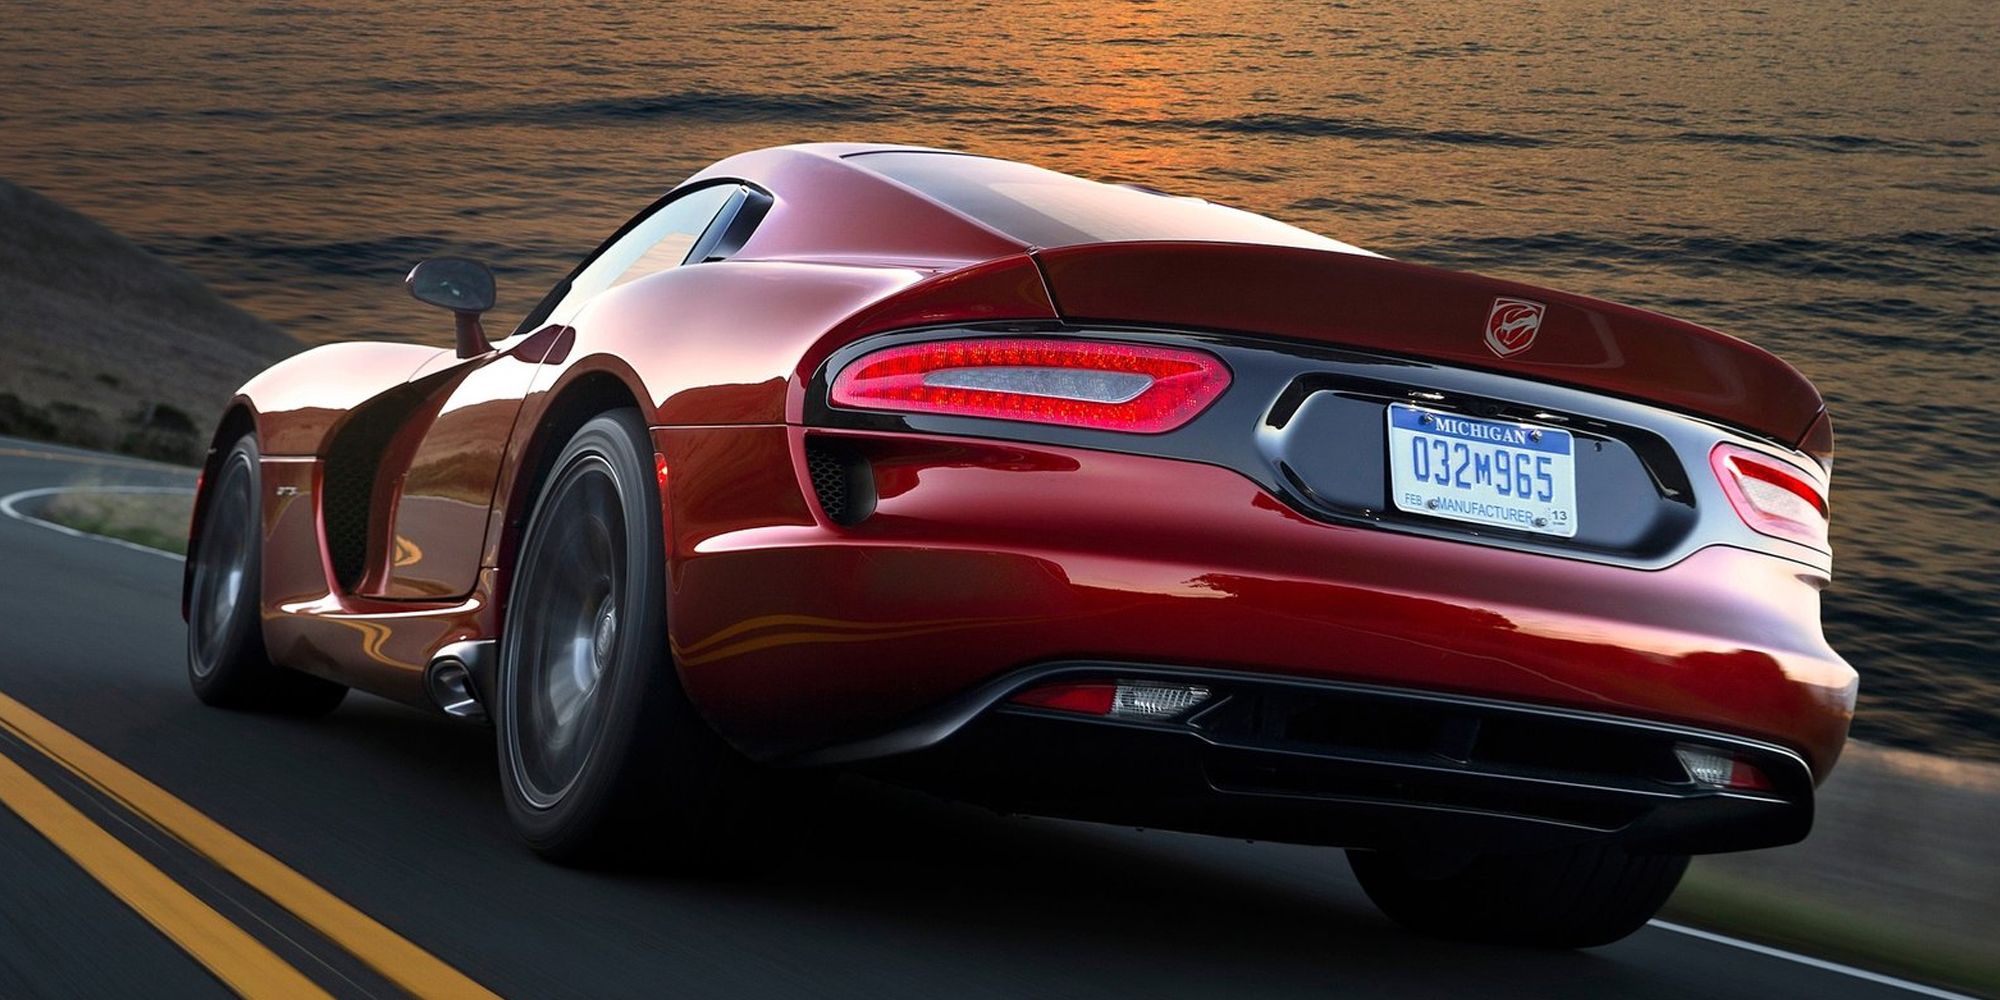 The rear of a red Viper GTS on the move